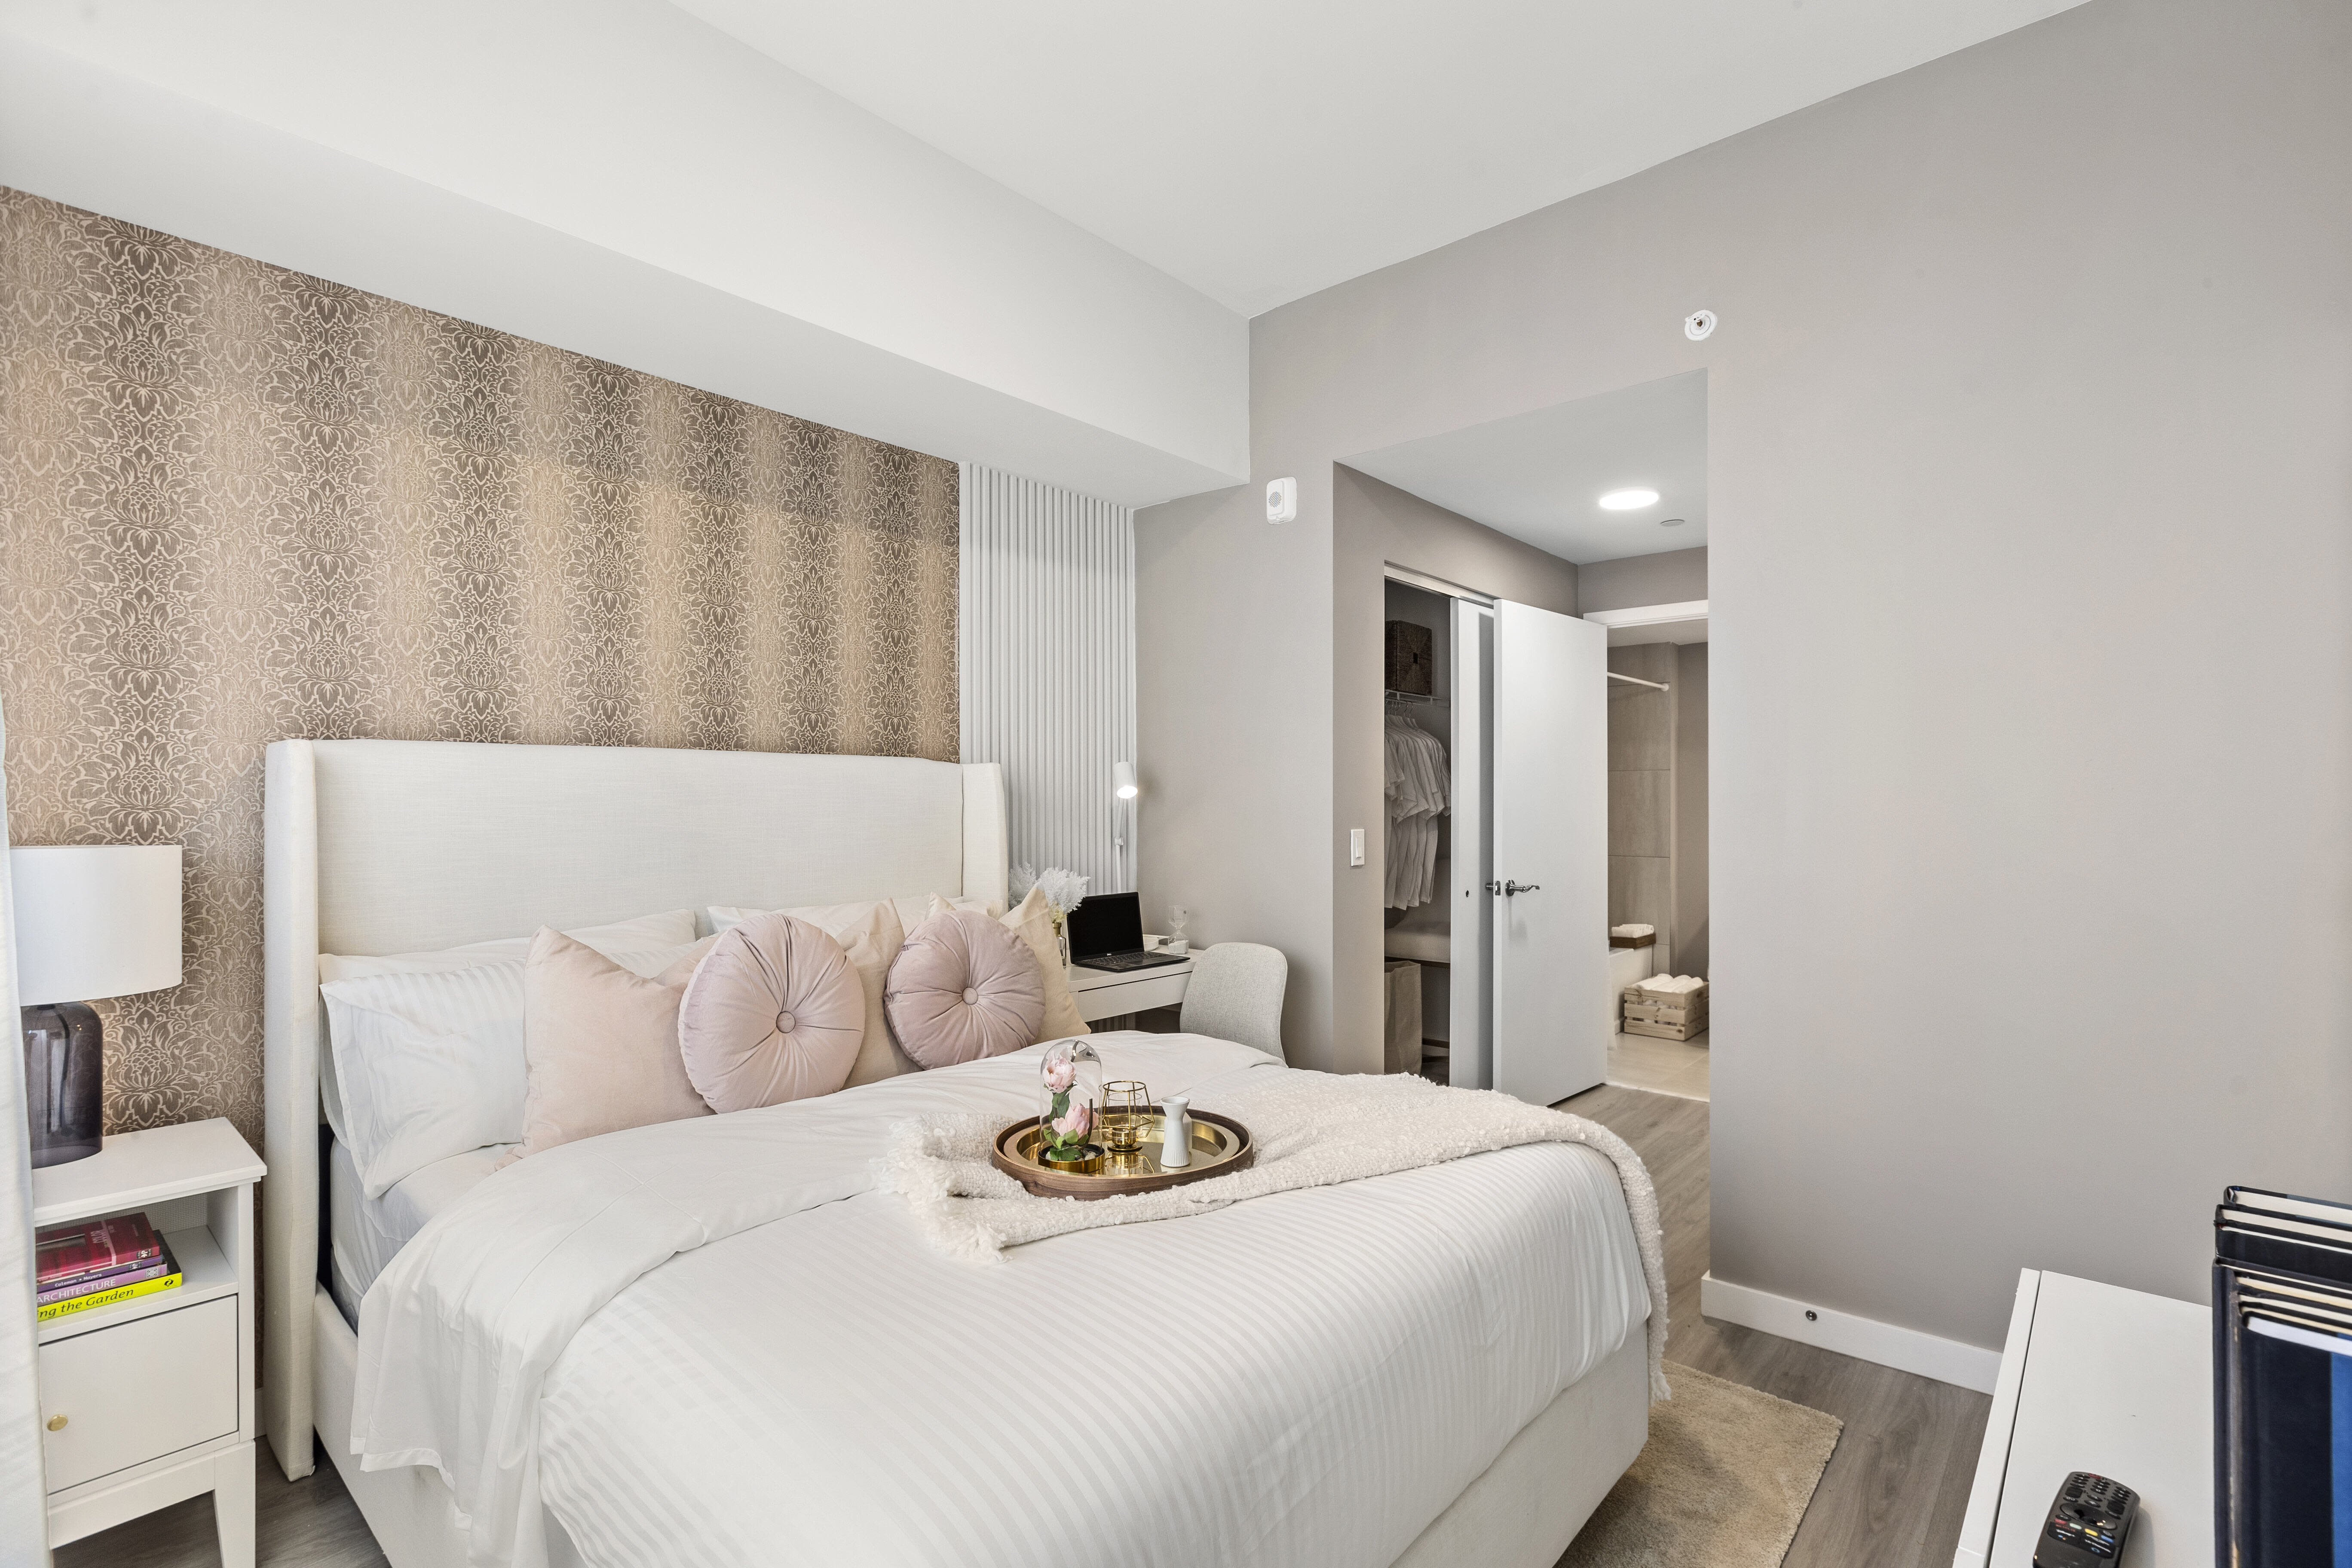 Step into a furnished apartment model bedroom at Pine Ridge in West Palm Beach, Florida, featuring natural light, contemporary furnishings, and wood-style flooring